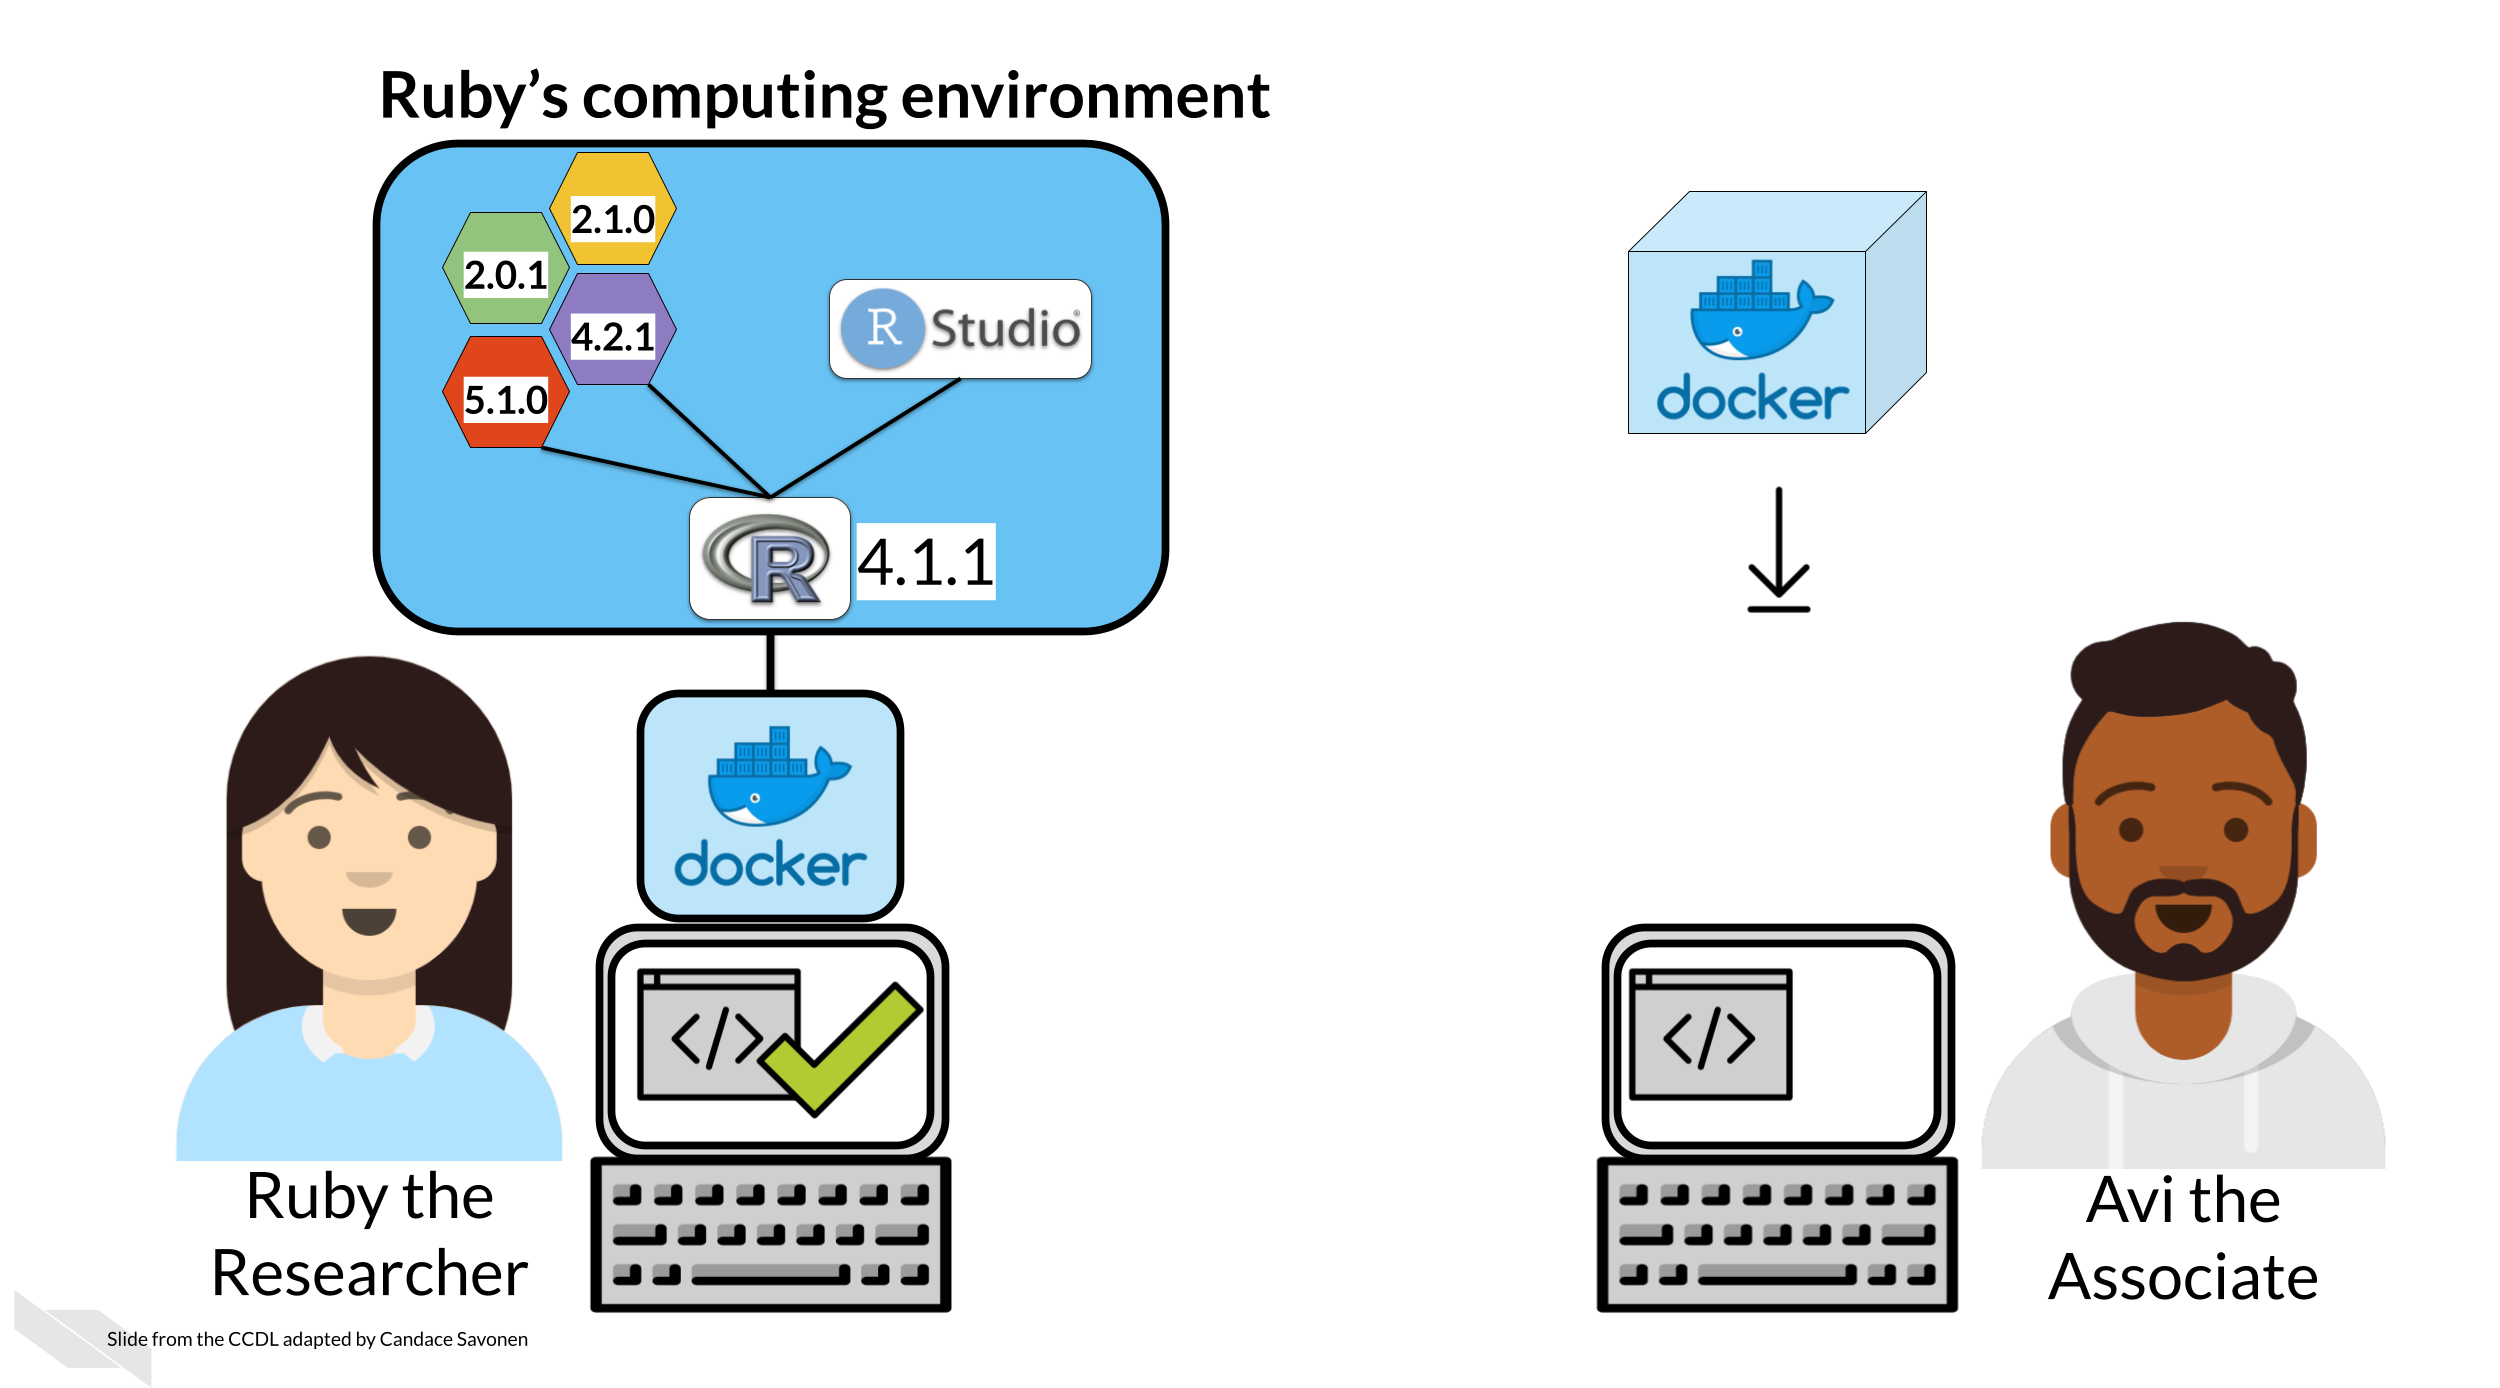 Ruby has a particular computing environment she has developed her code from but this time Ruby has this computing environment wrapped up in a Docker container. Avi the Associate is able to download the exact computing environment Ruby used for her analysis.